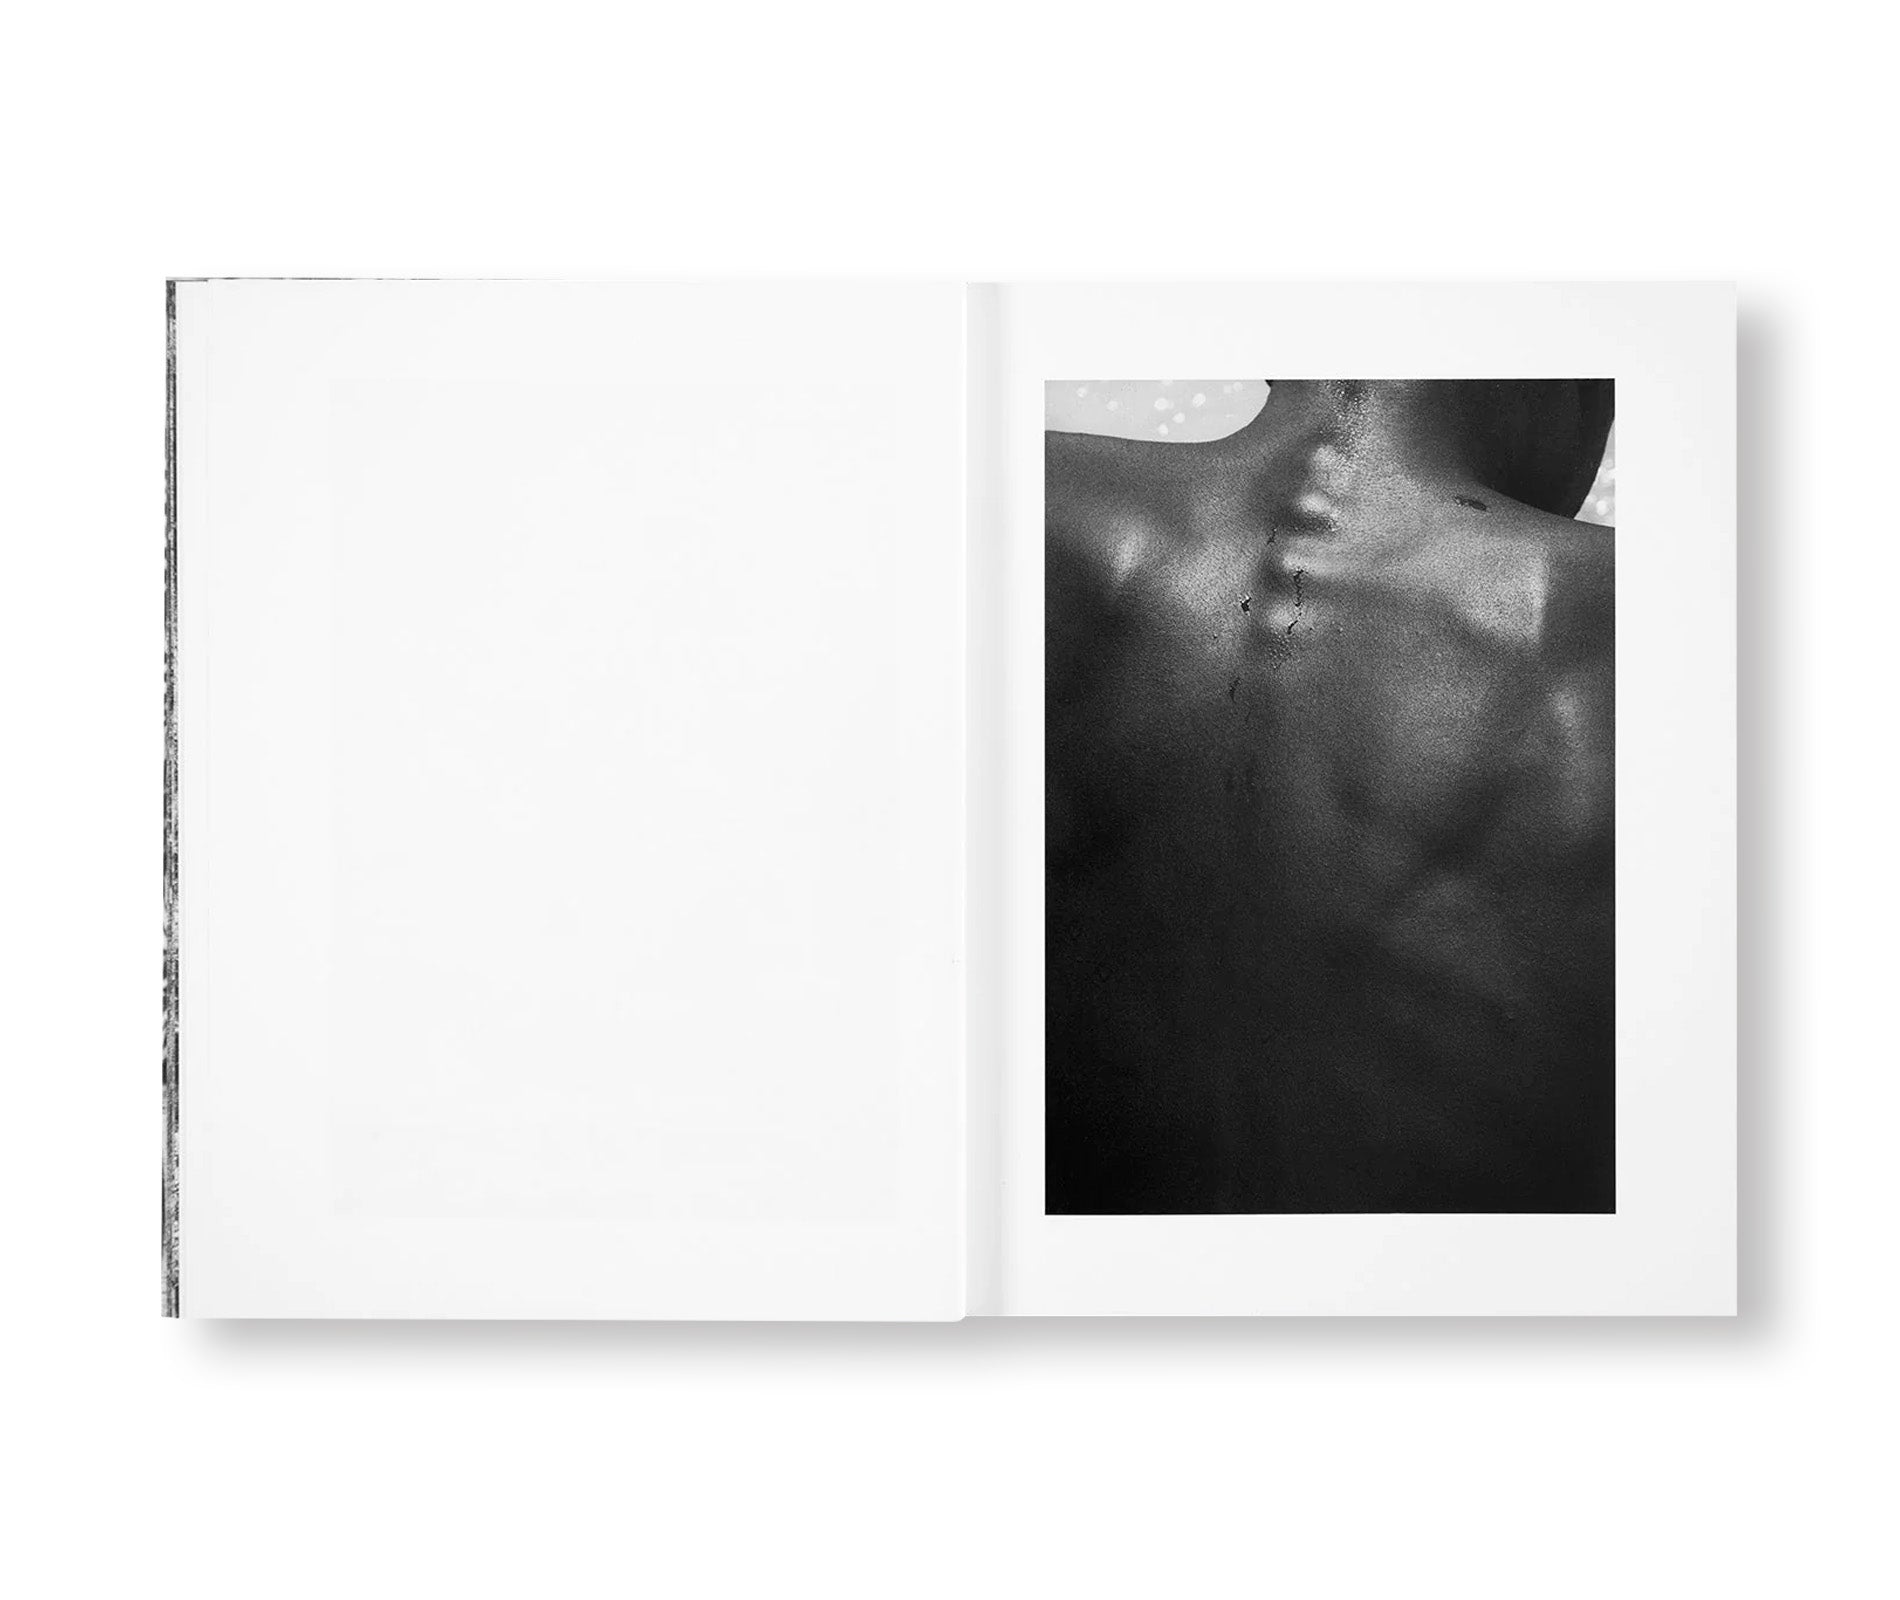 LICK OF TONGUE, RUB OF FINGER, ON SOFT WOUND by Keisha Scarville